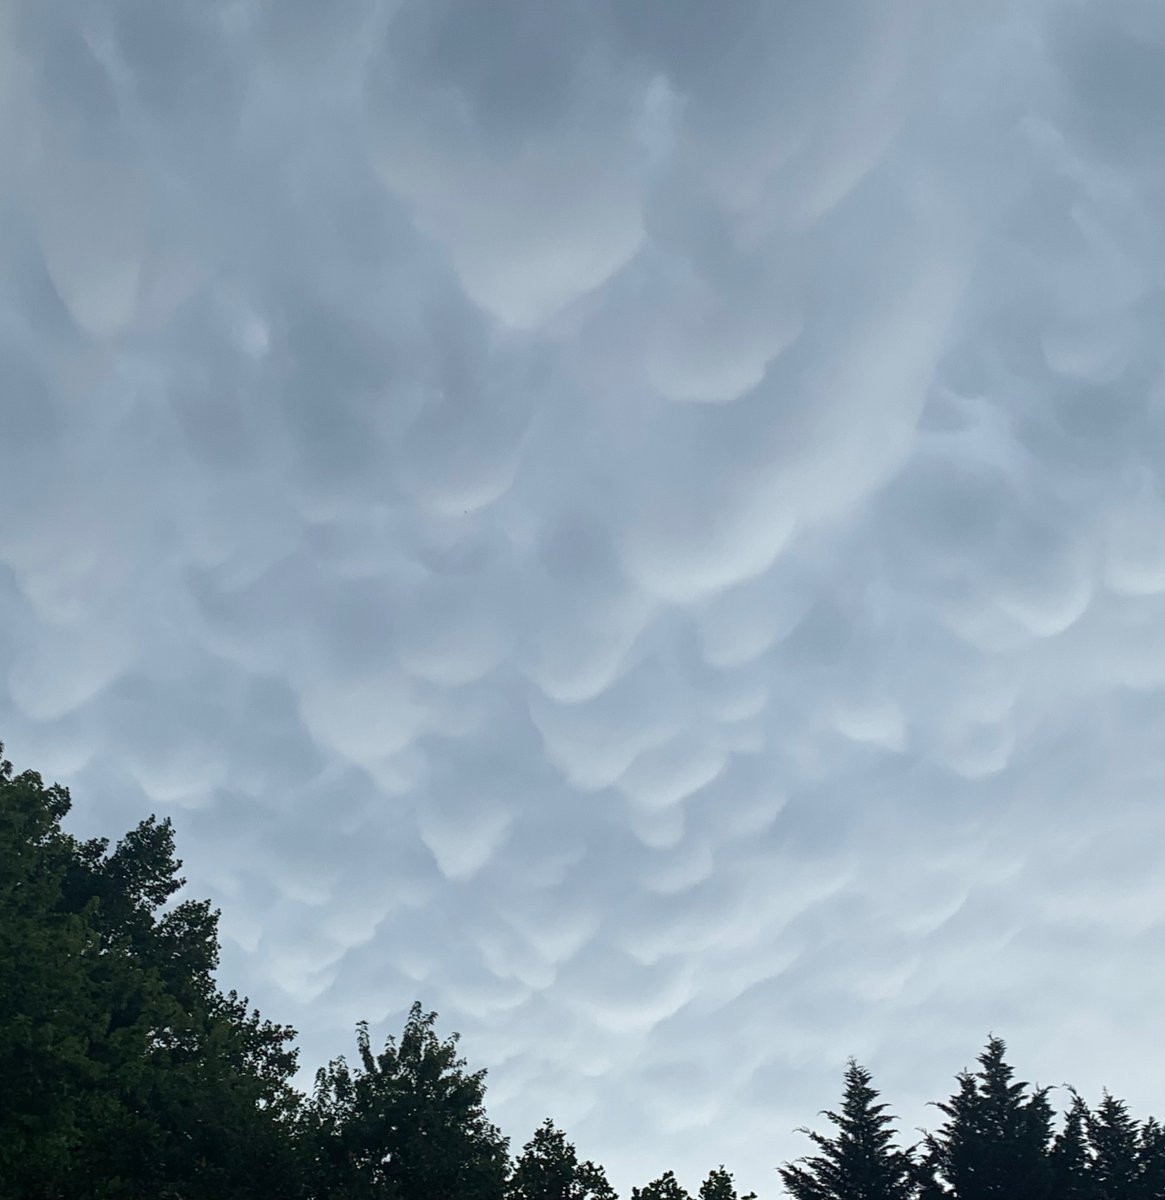 Mammatus clouds(?) after the storm in Arnold MD @capitalweather